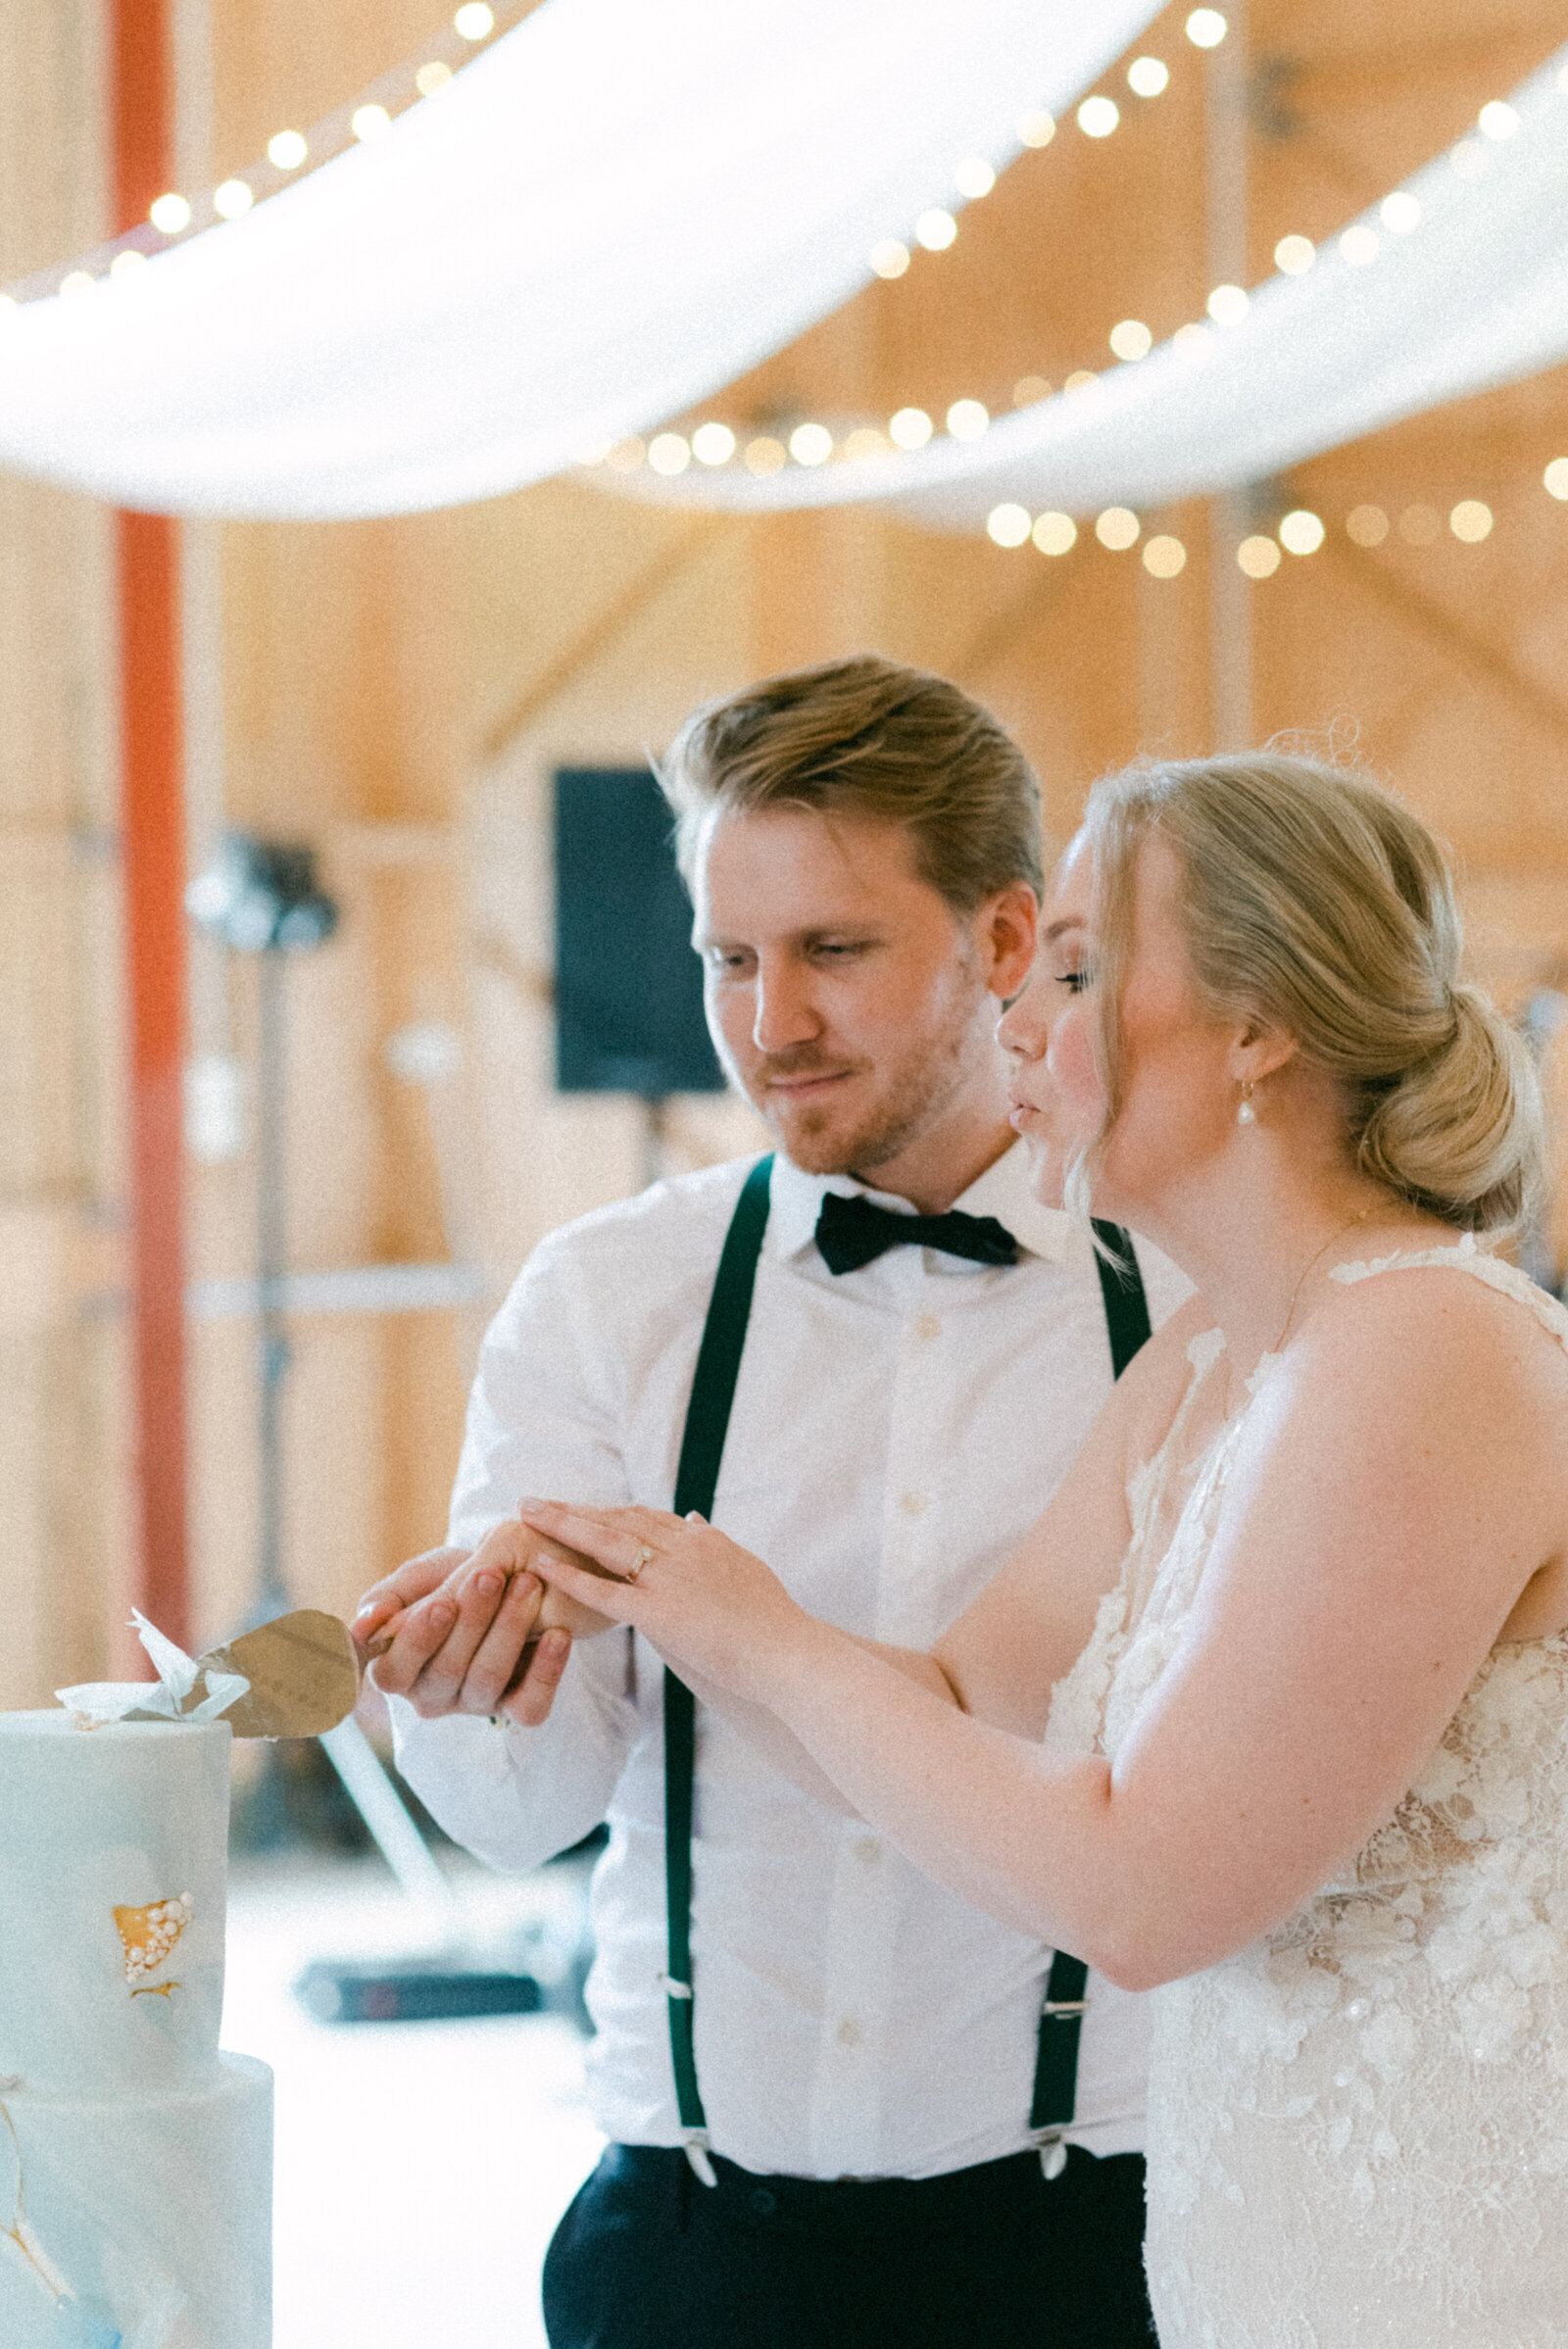 The wedding couple cutting the wedding cake in an image photographed by wedding photographer Hannika Gabrielsson.